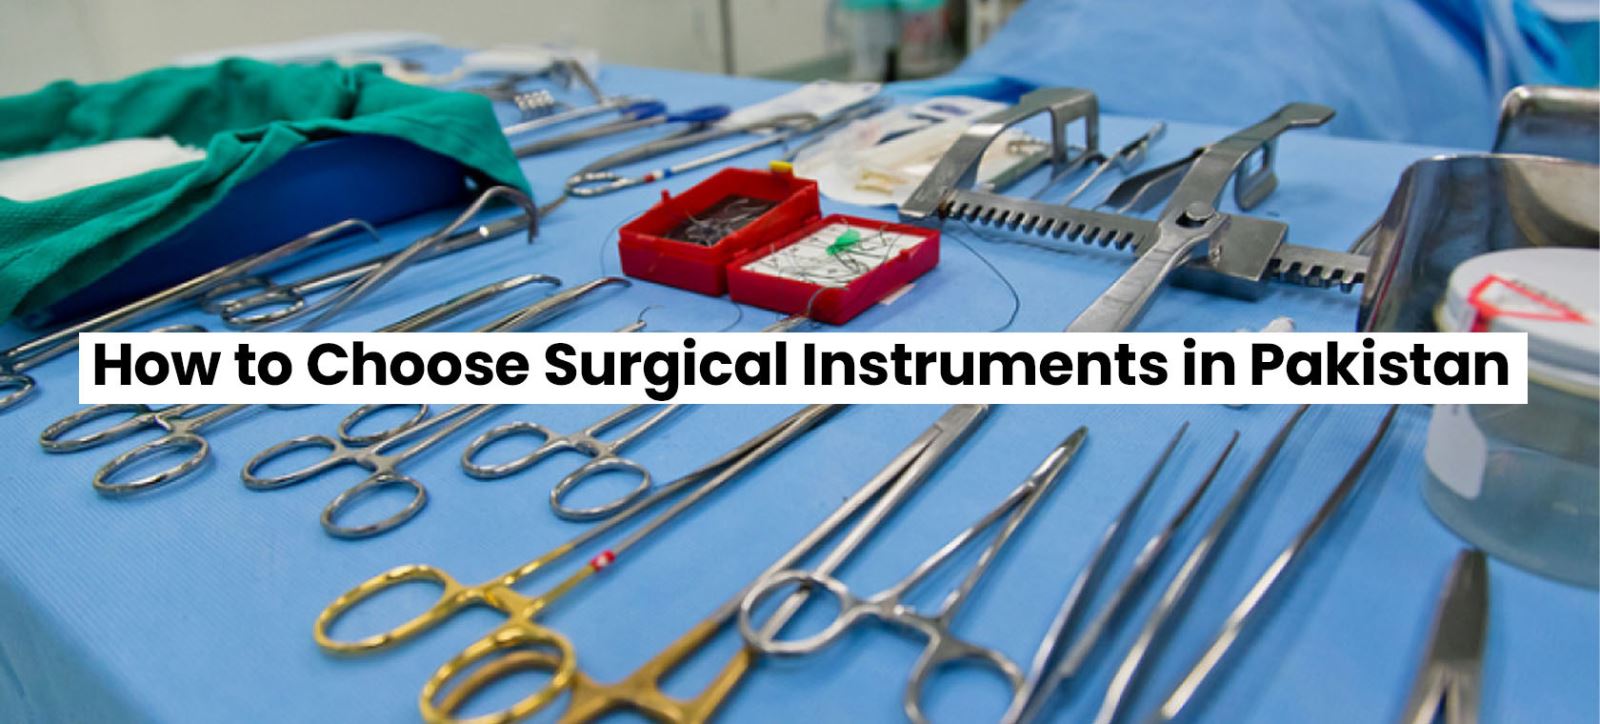 How to Choose Surgical Instruments